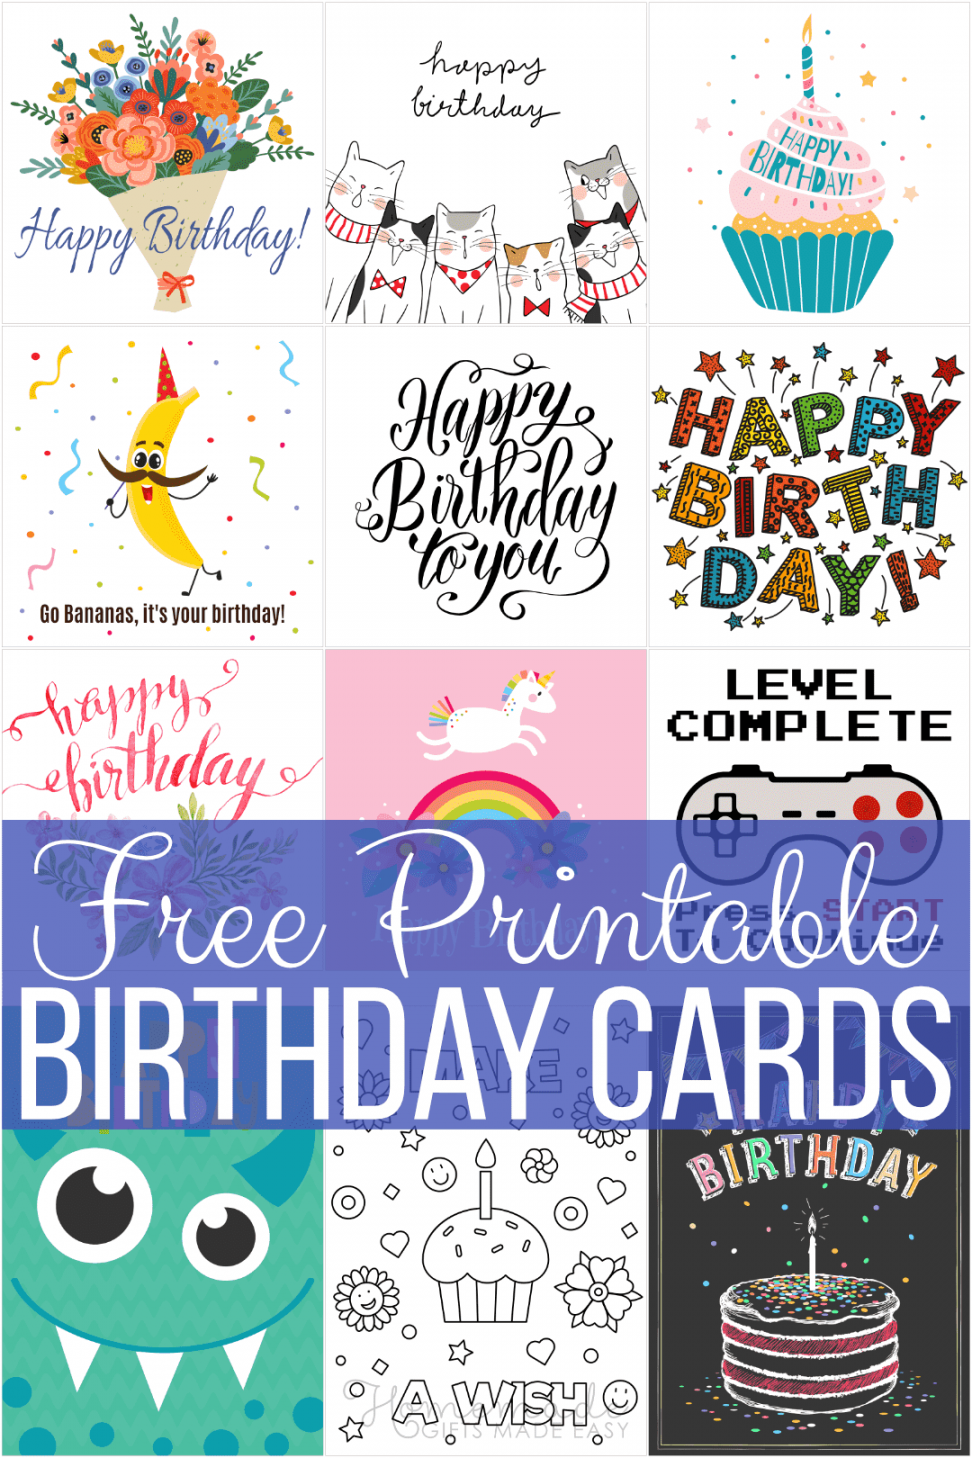 Free Printable Cards for all Occasions